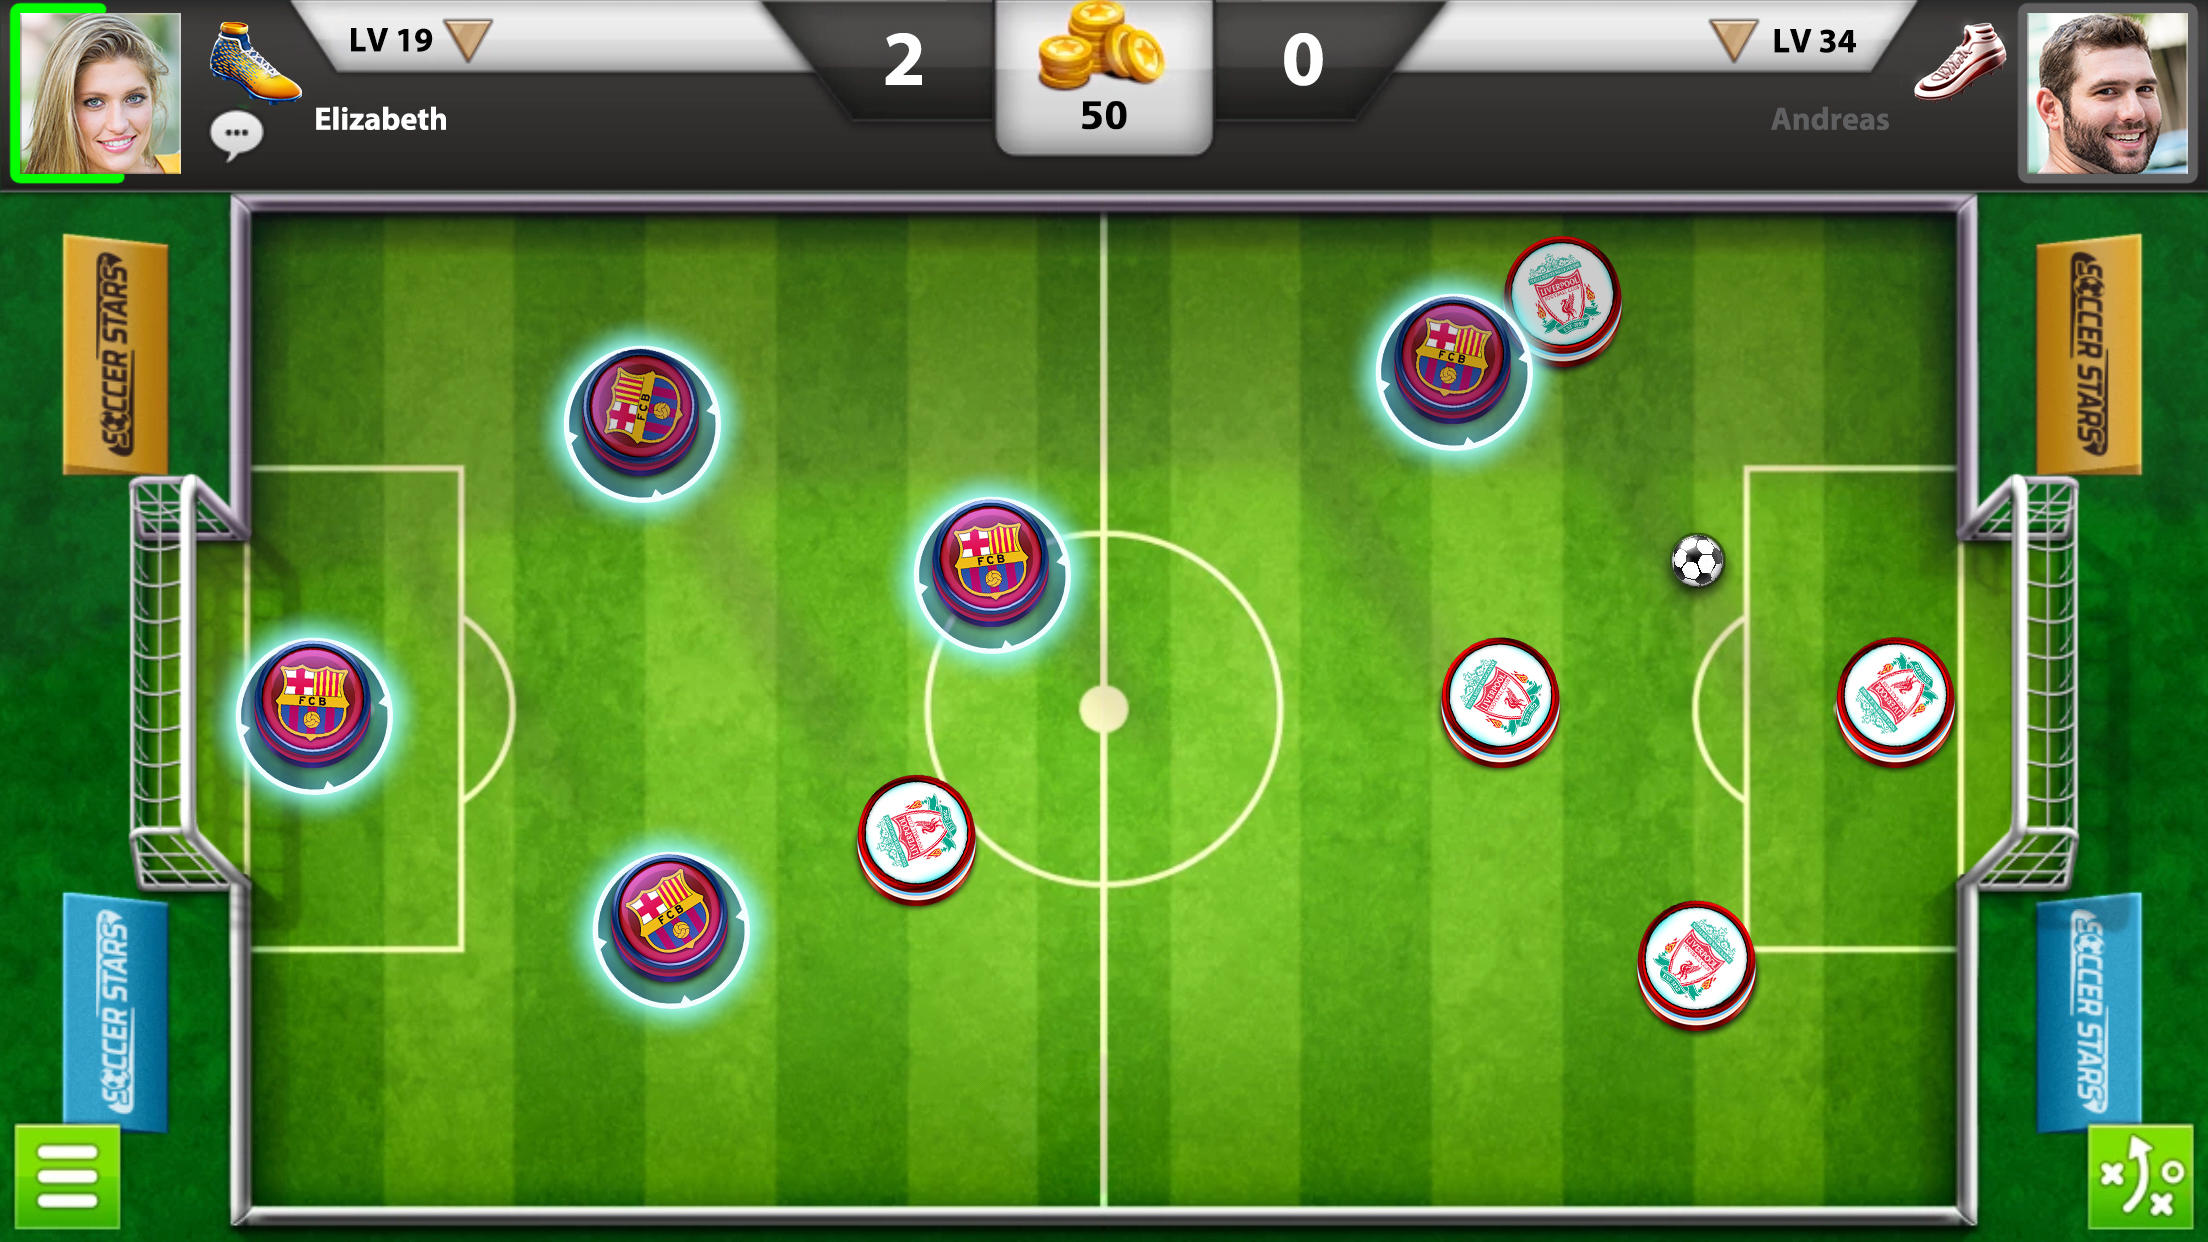 Making Soccer Star MOD APK for Android Free Download